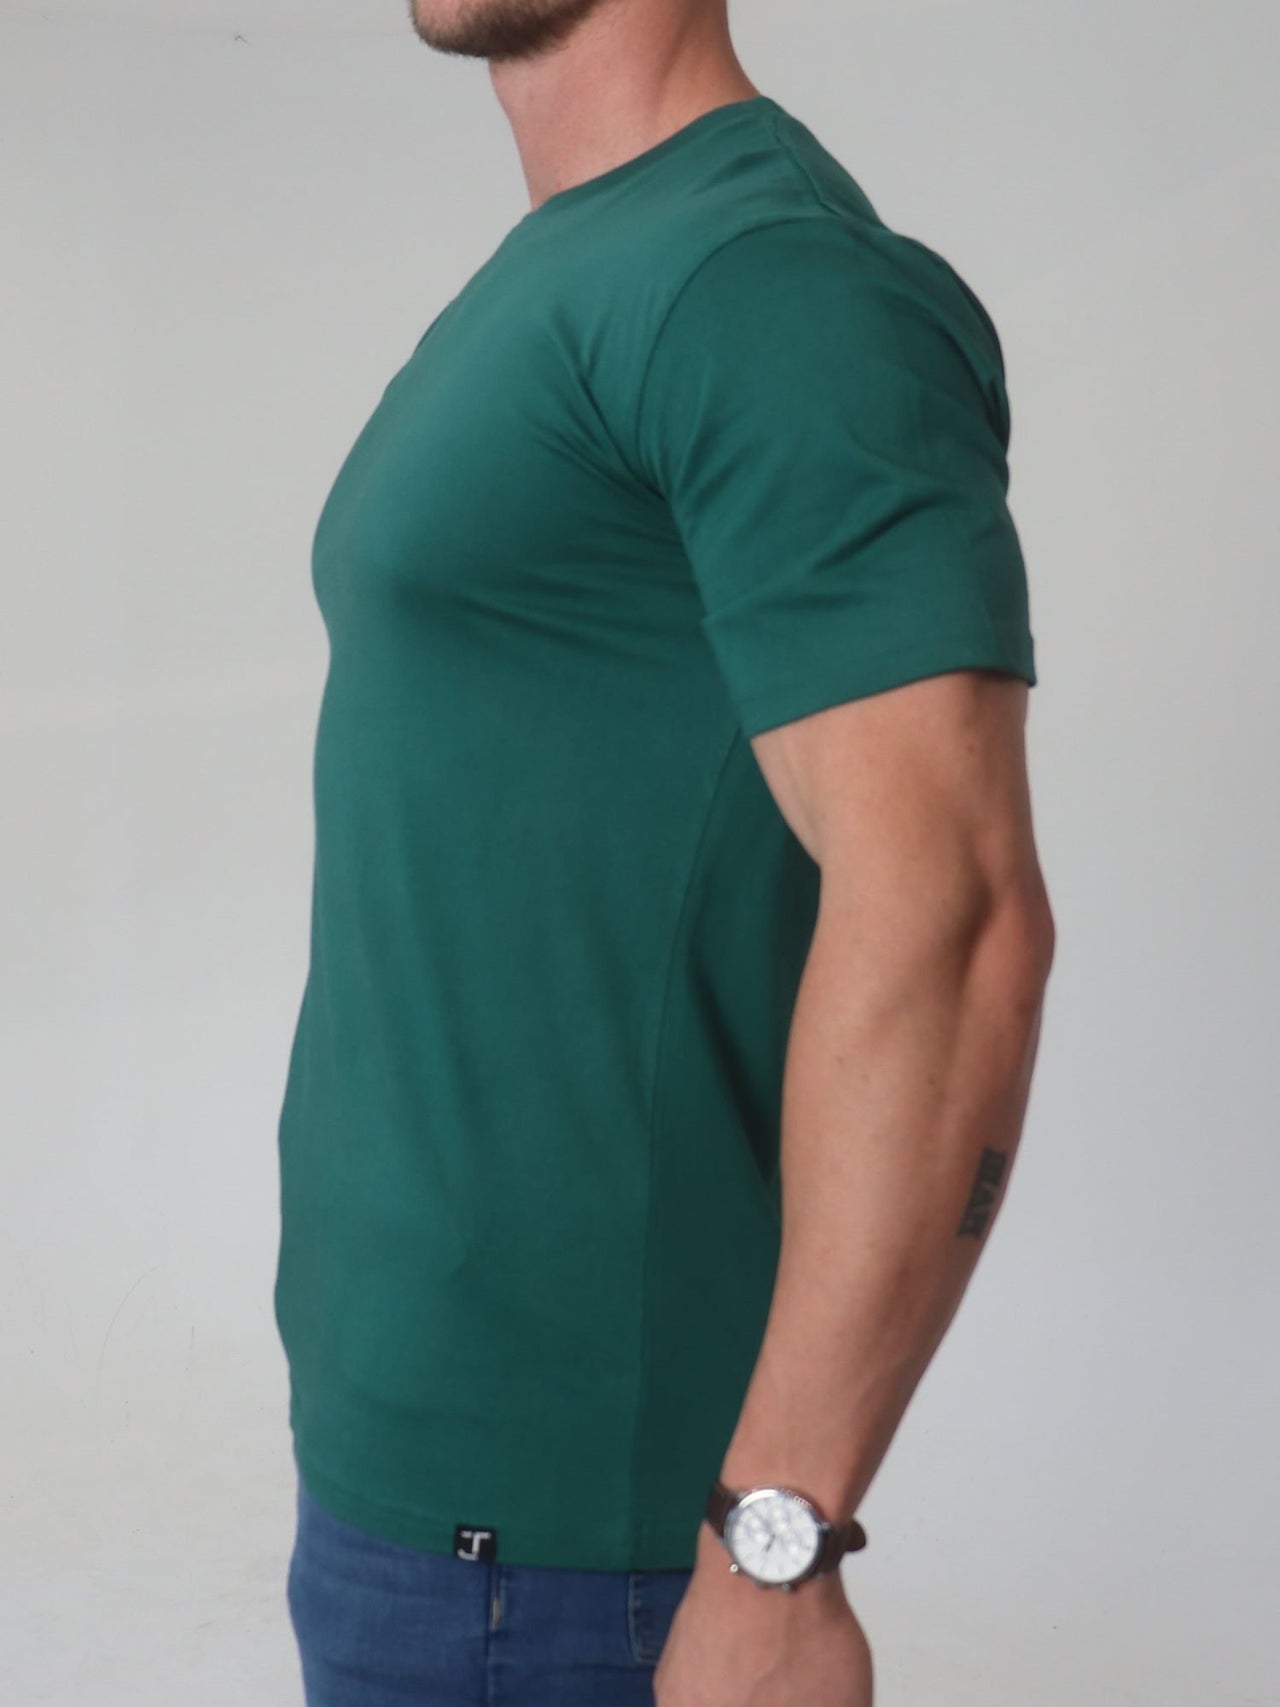 A side on view of a tall broad guy wearing a 2XL tall slim t-shirt.